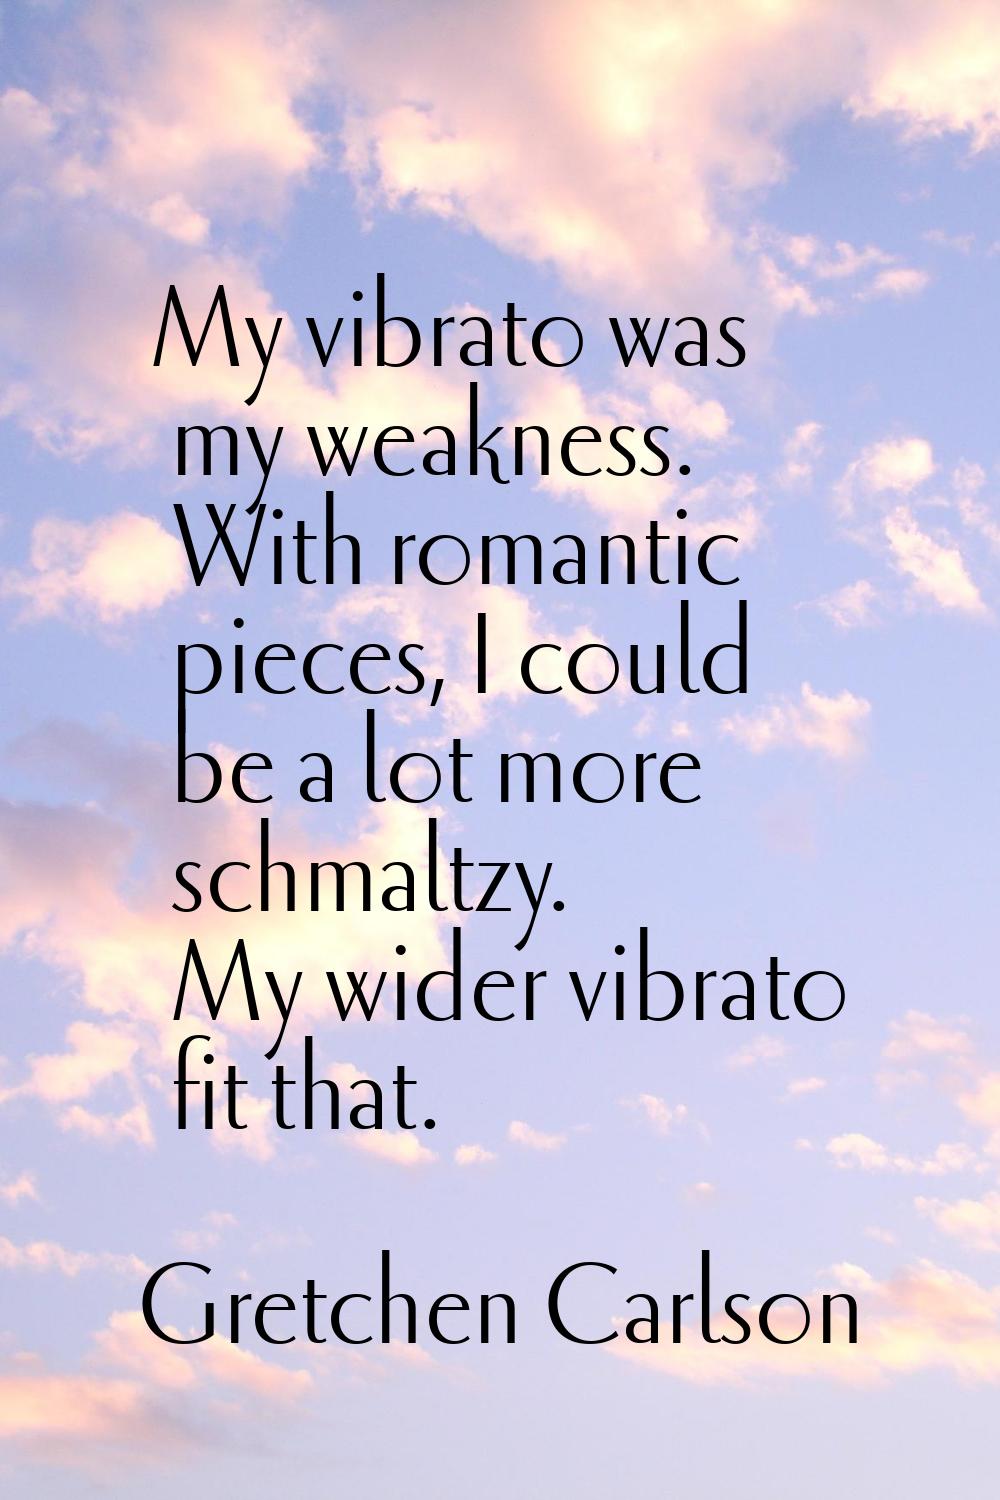 My vibrato was my weakness. With romantic pieces, I could be a lot more schmaltzy. My wider vibrato